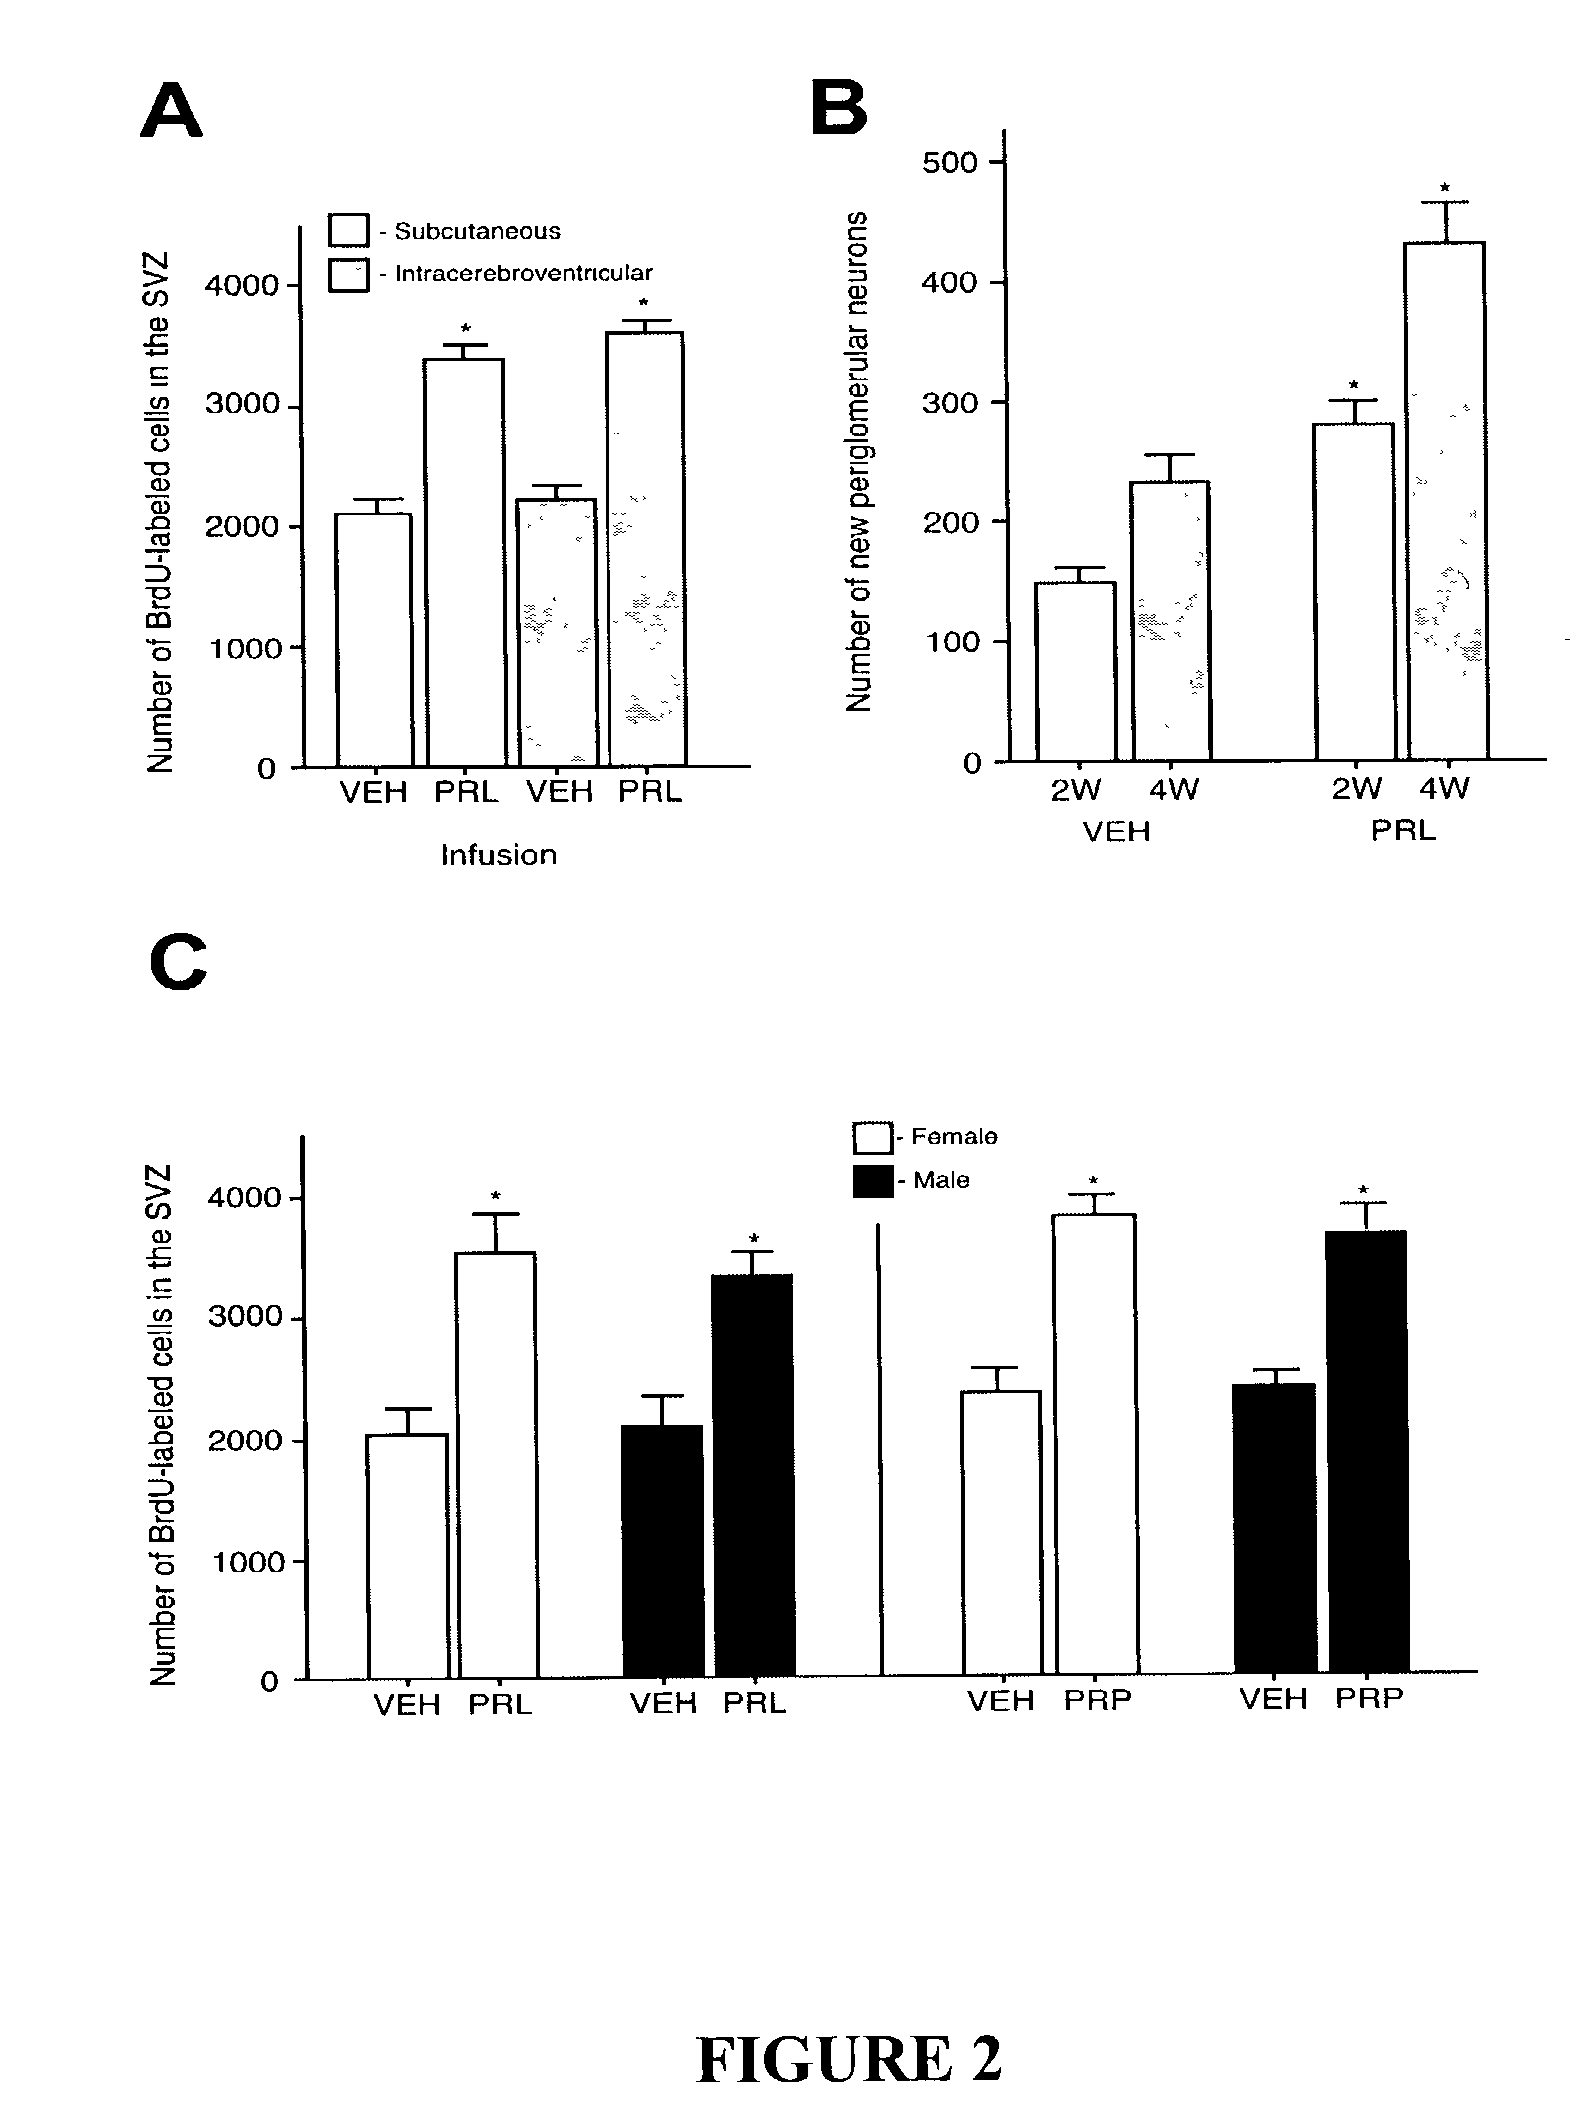 Prolactin induced increase in neural stem cell numbers